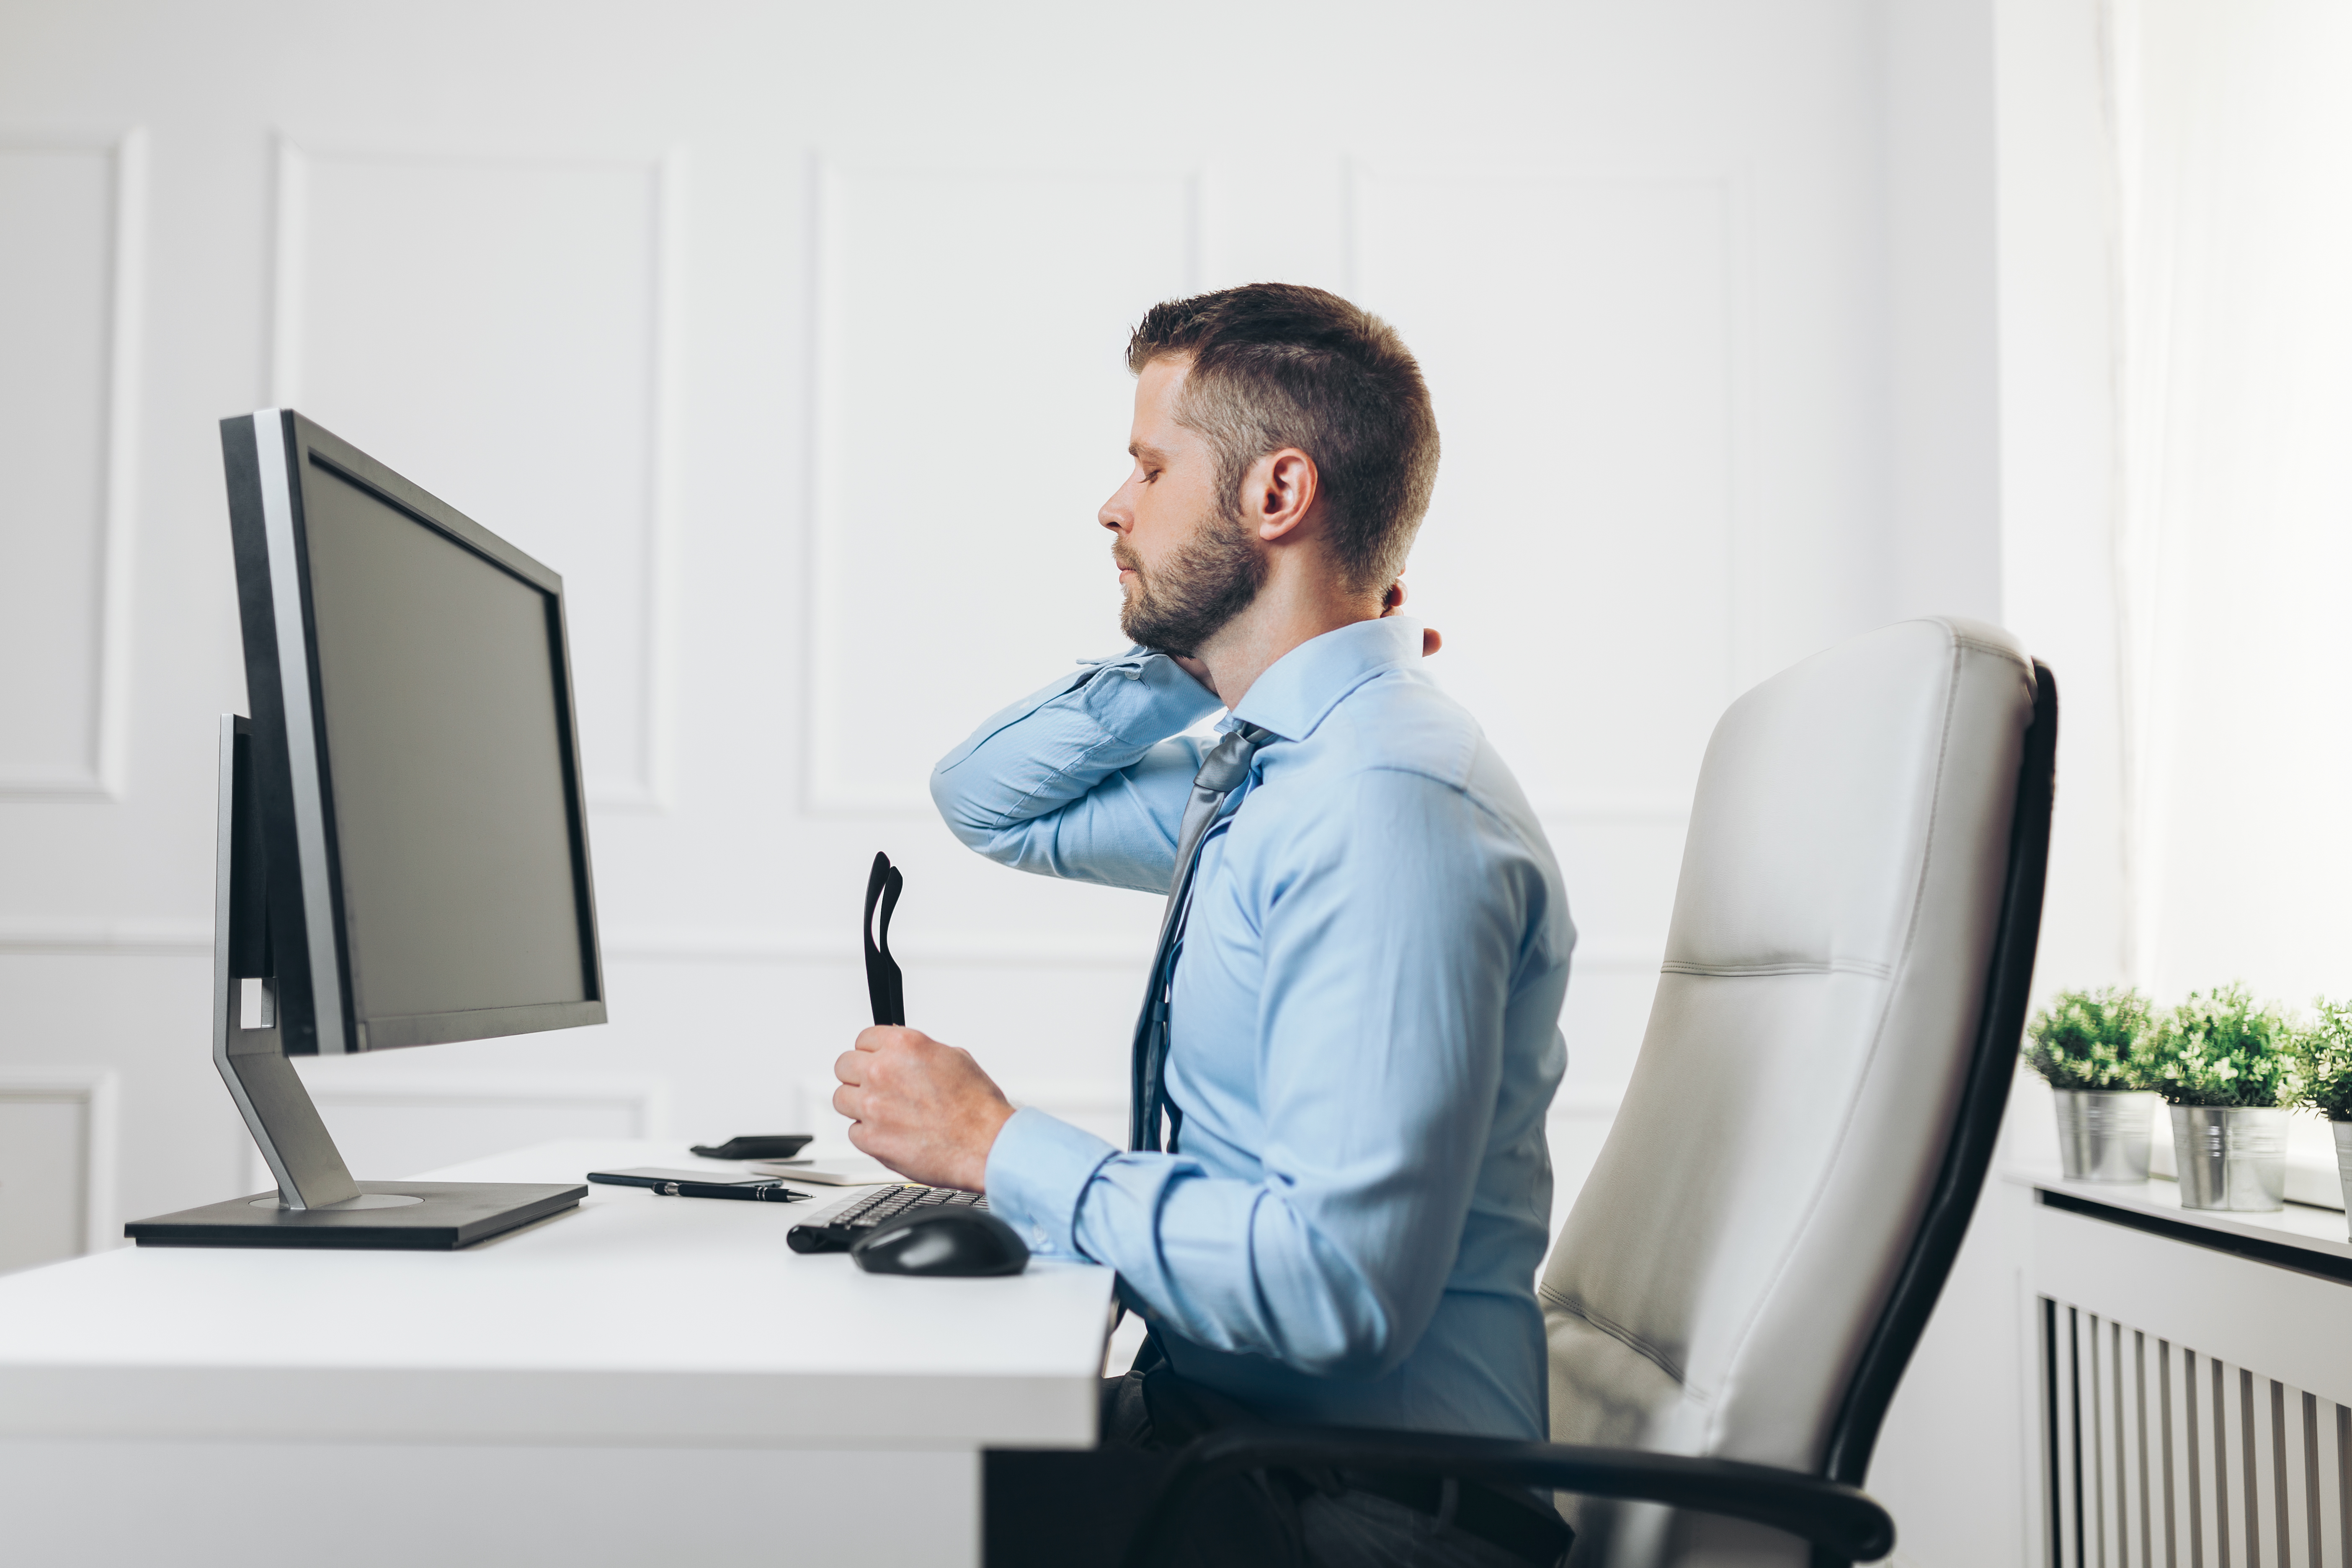 Desk Ergonomics – How To Make The Most Of Your Workspace